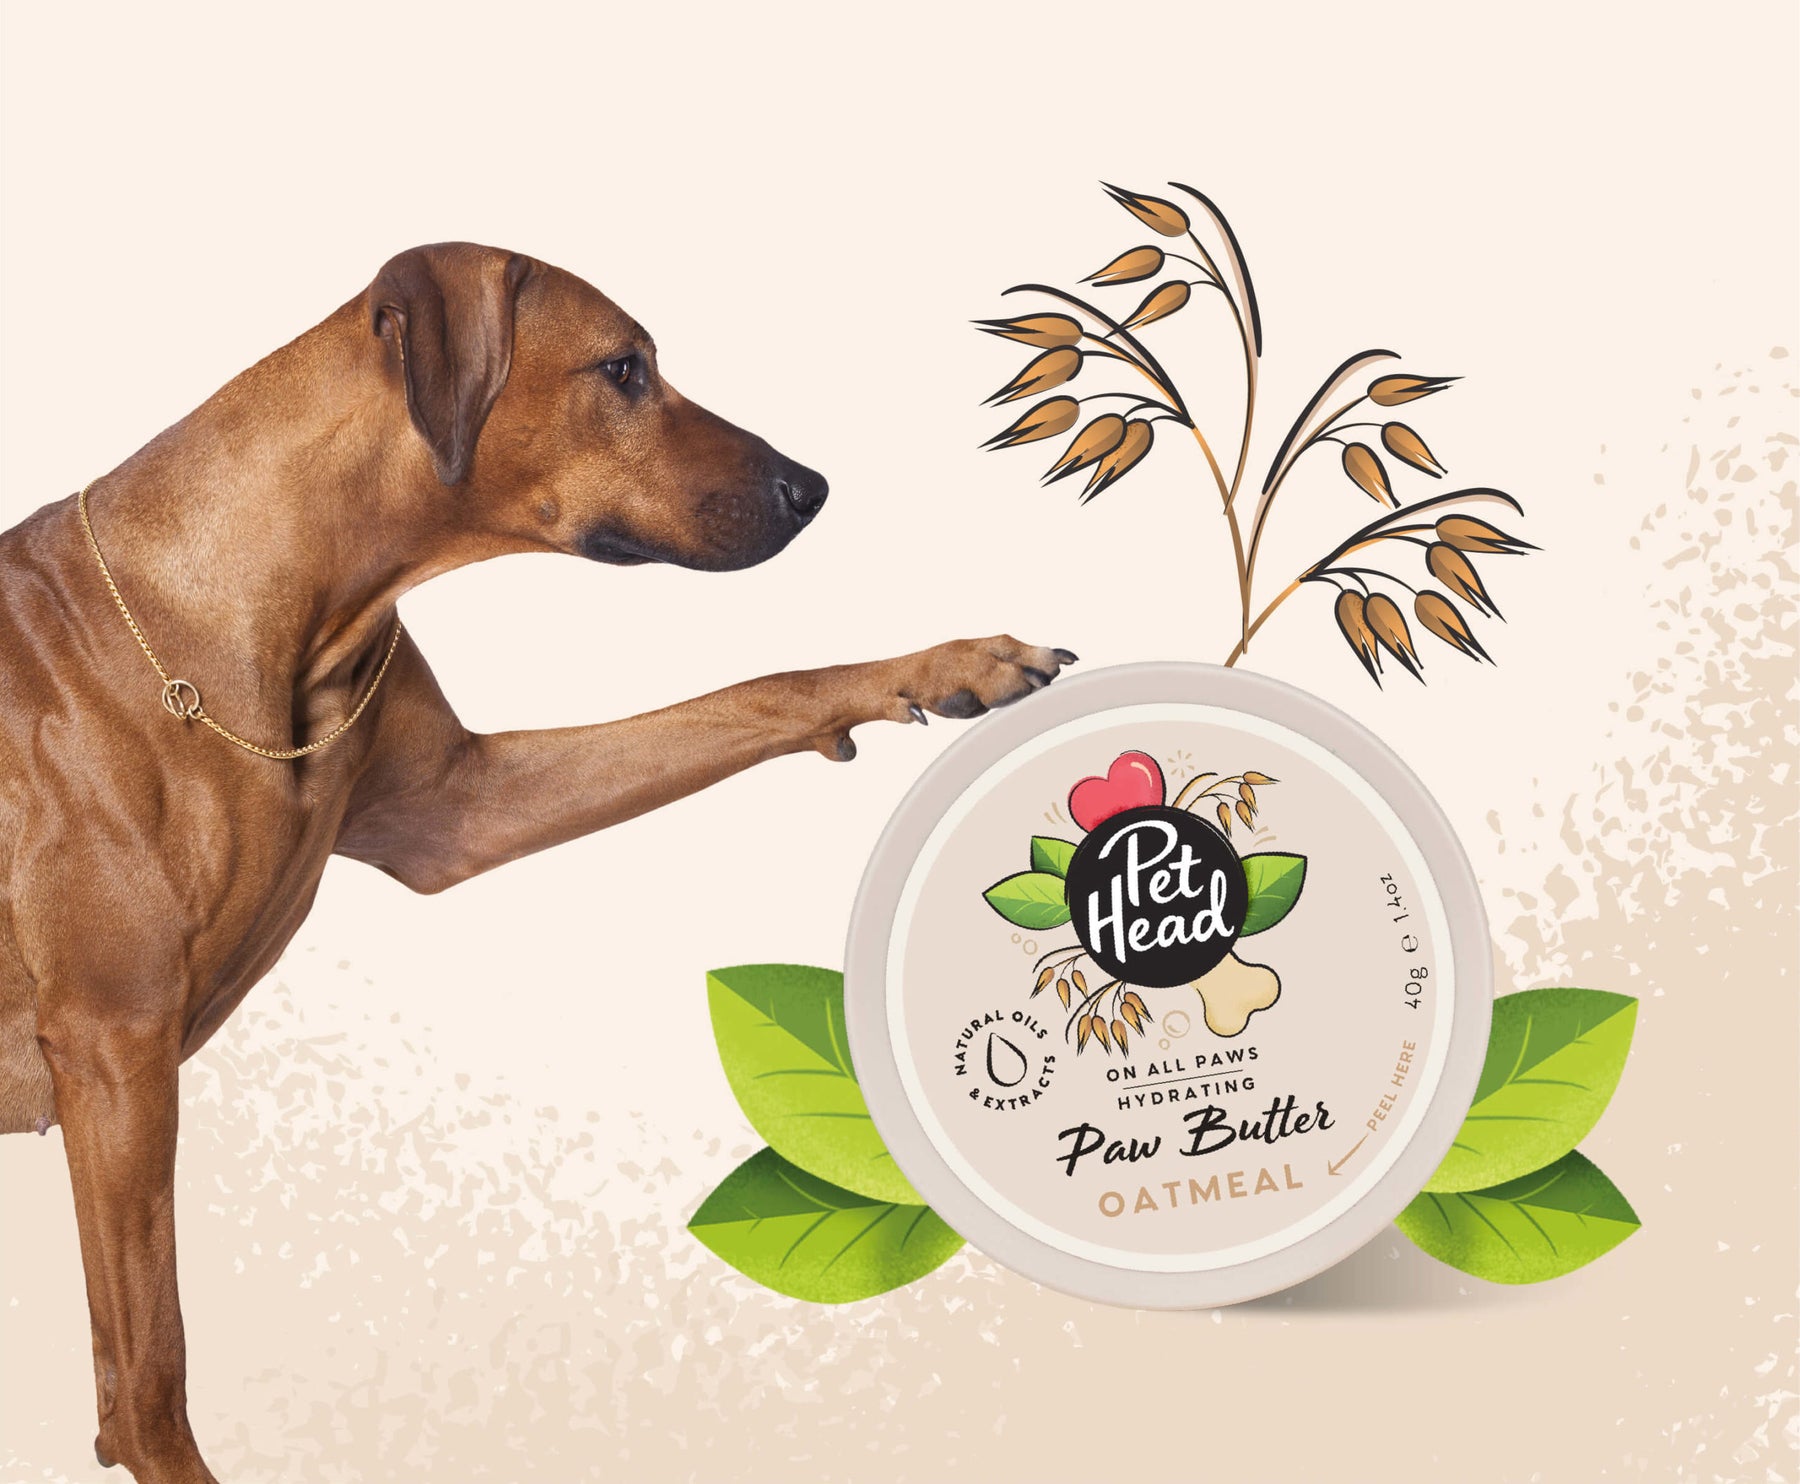 Pet Head On All Paws Paw Butter Oatmeal